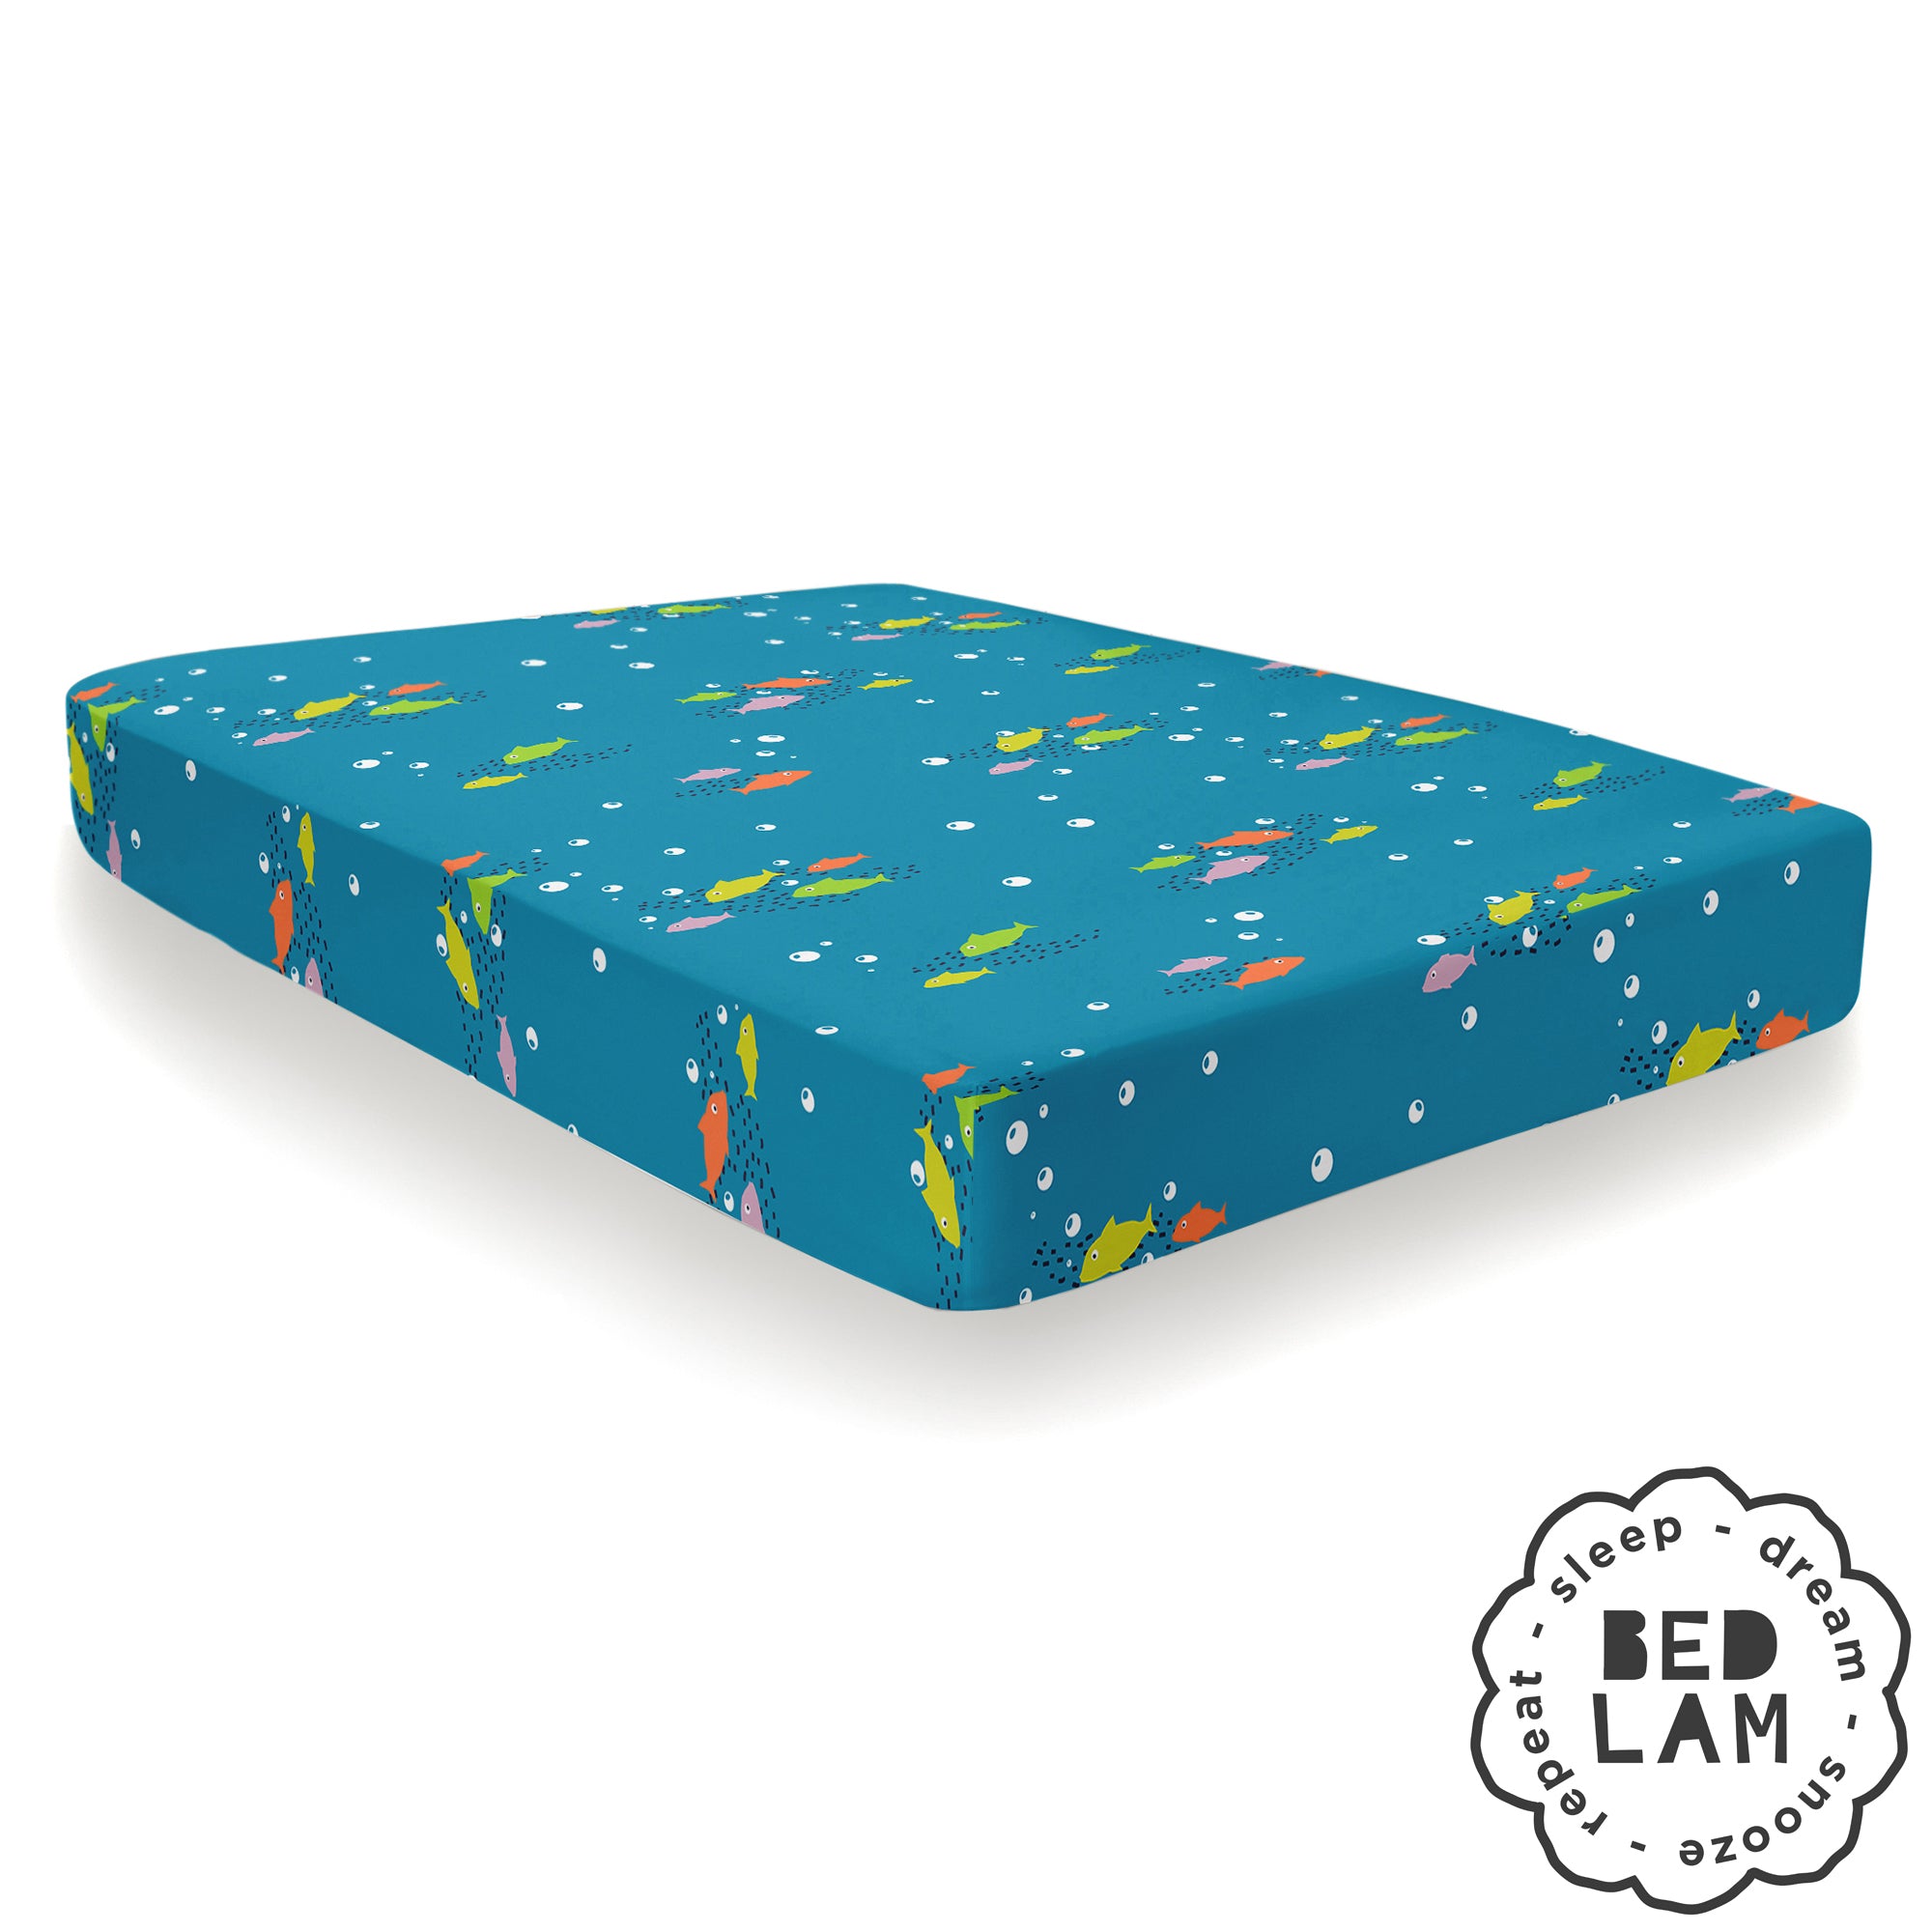 Sea Life - Glow In The Dark Duvet Cover Set, Curtains & Fitted Sheets - by Bedlam